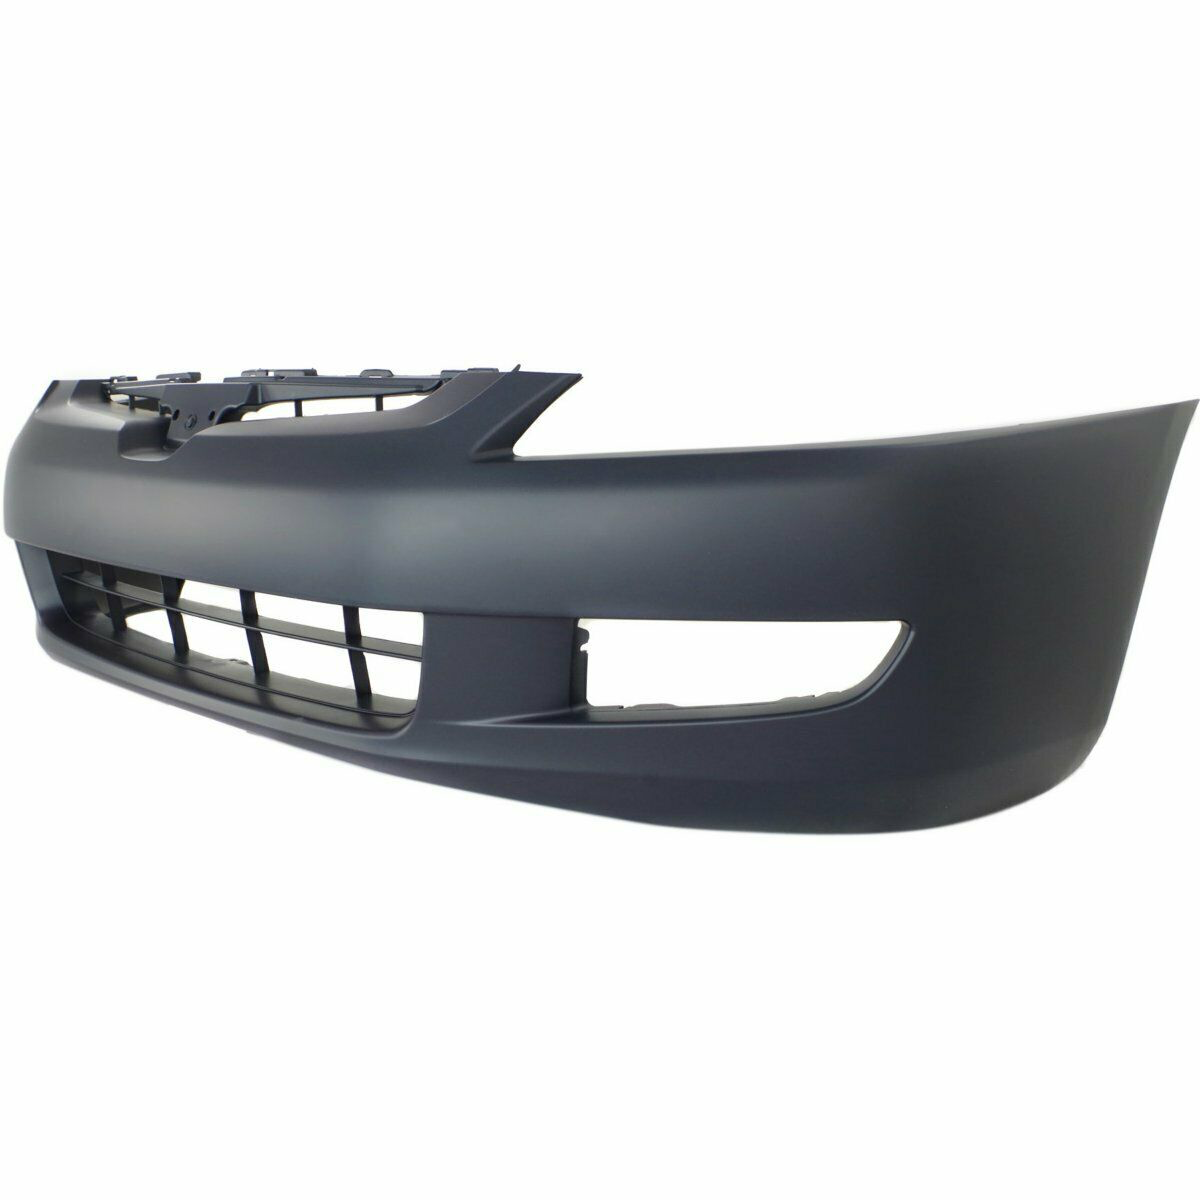 2003-2005 Honda Accord Coupe Front Bumper Painted to Match